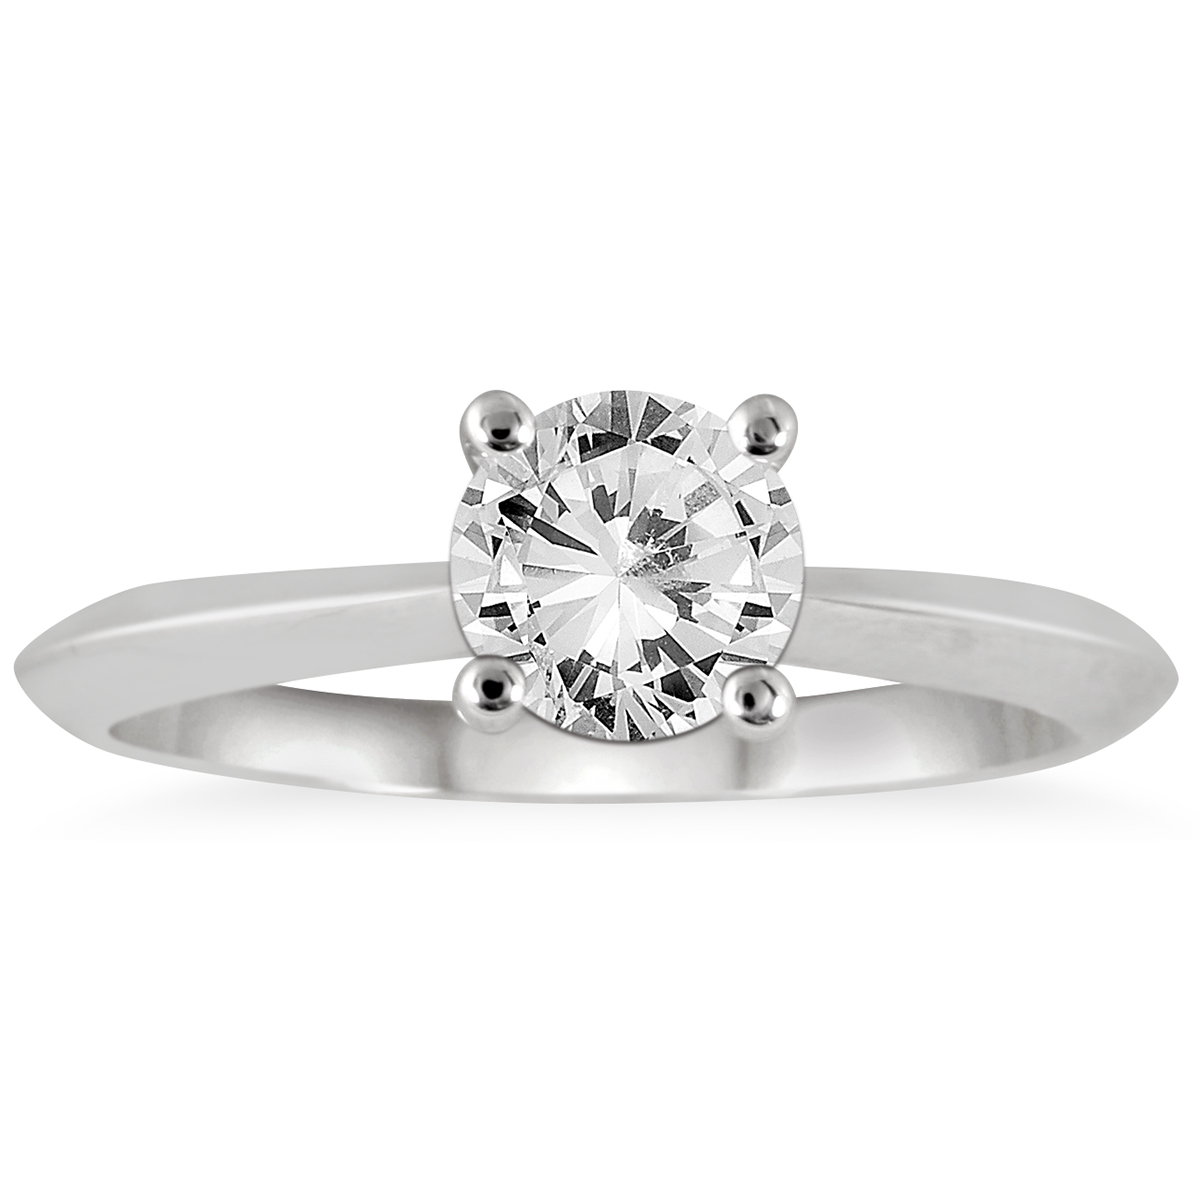 Image of AGS Certified 1 Carat Knife Edge Diamond Solitaire Ring in 14K White Gold (J-K Color I2-I3 Clarity)